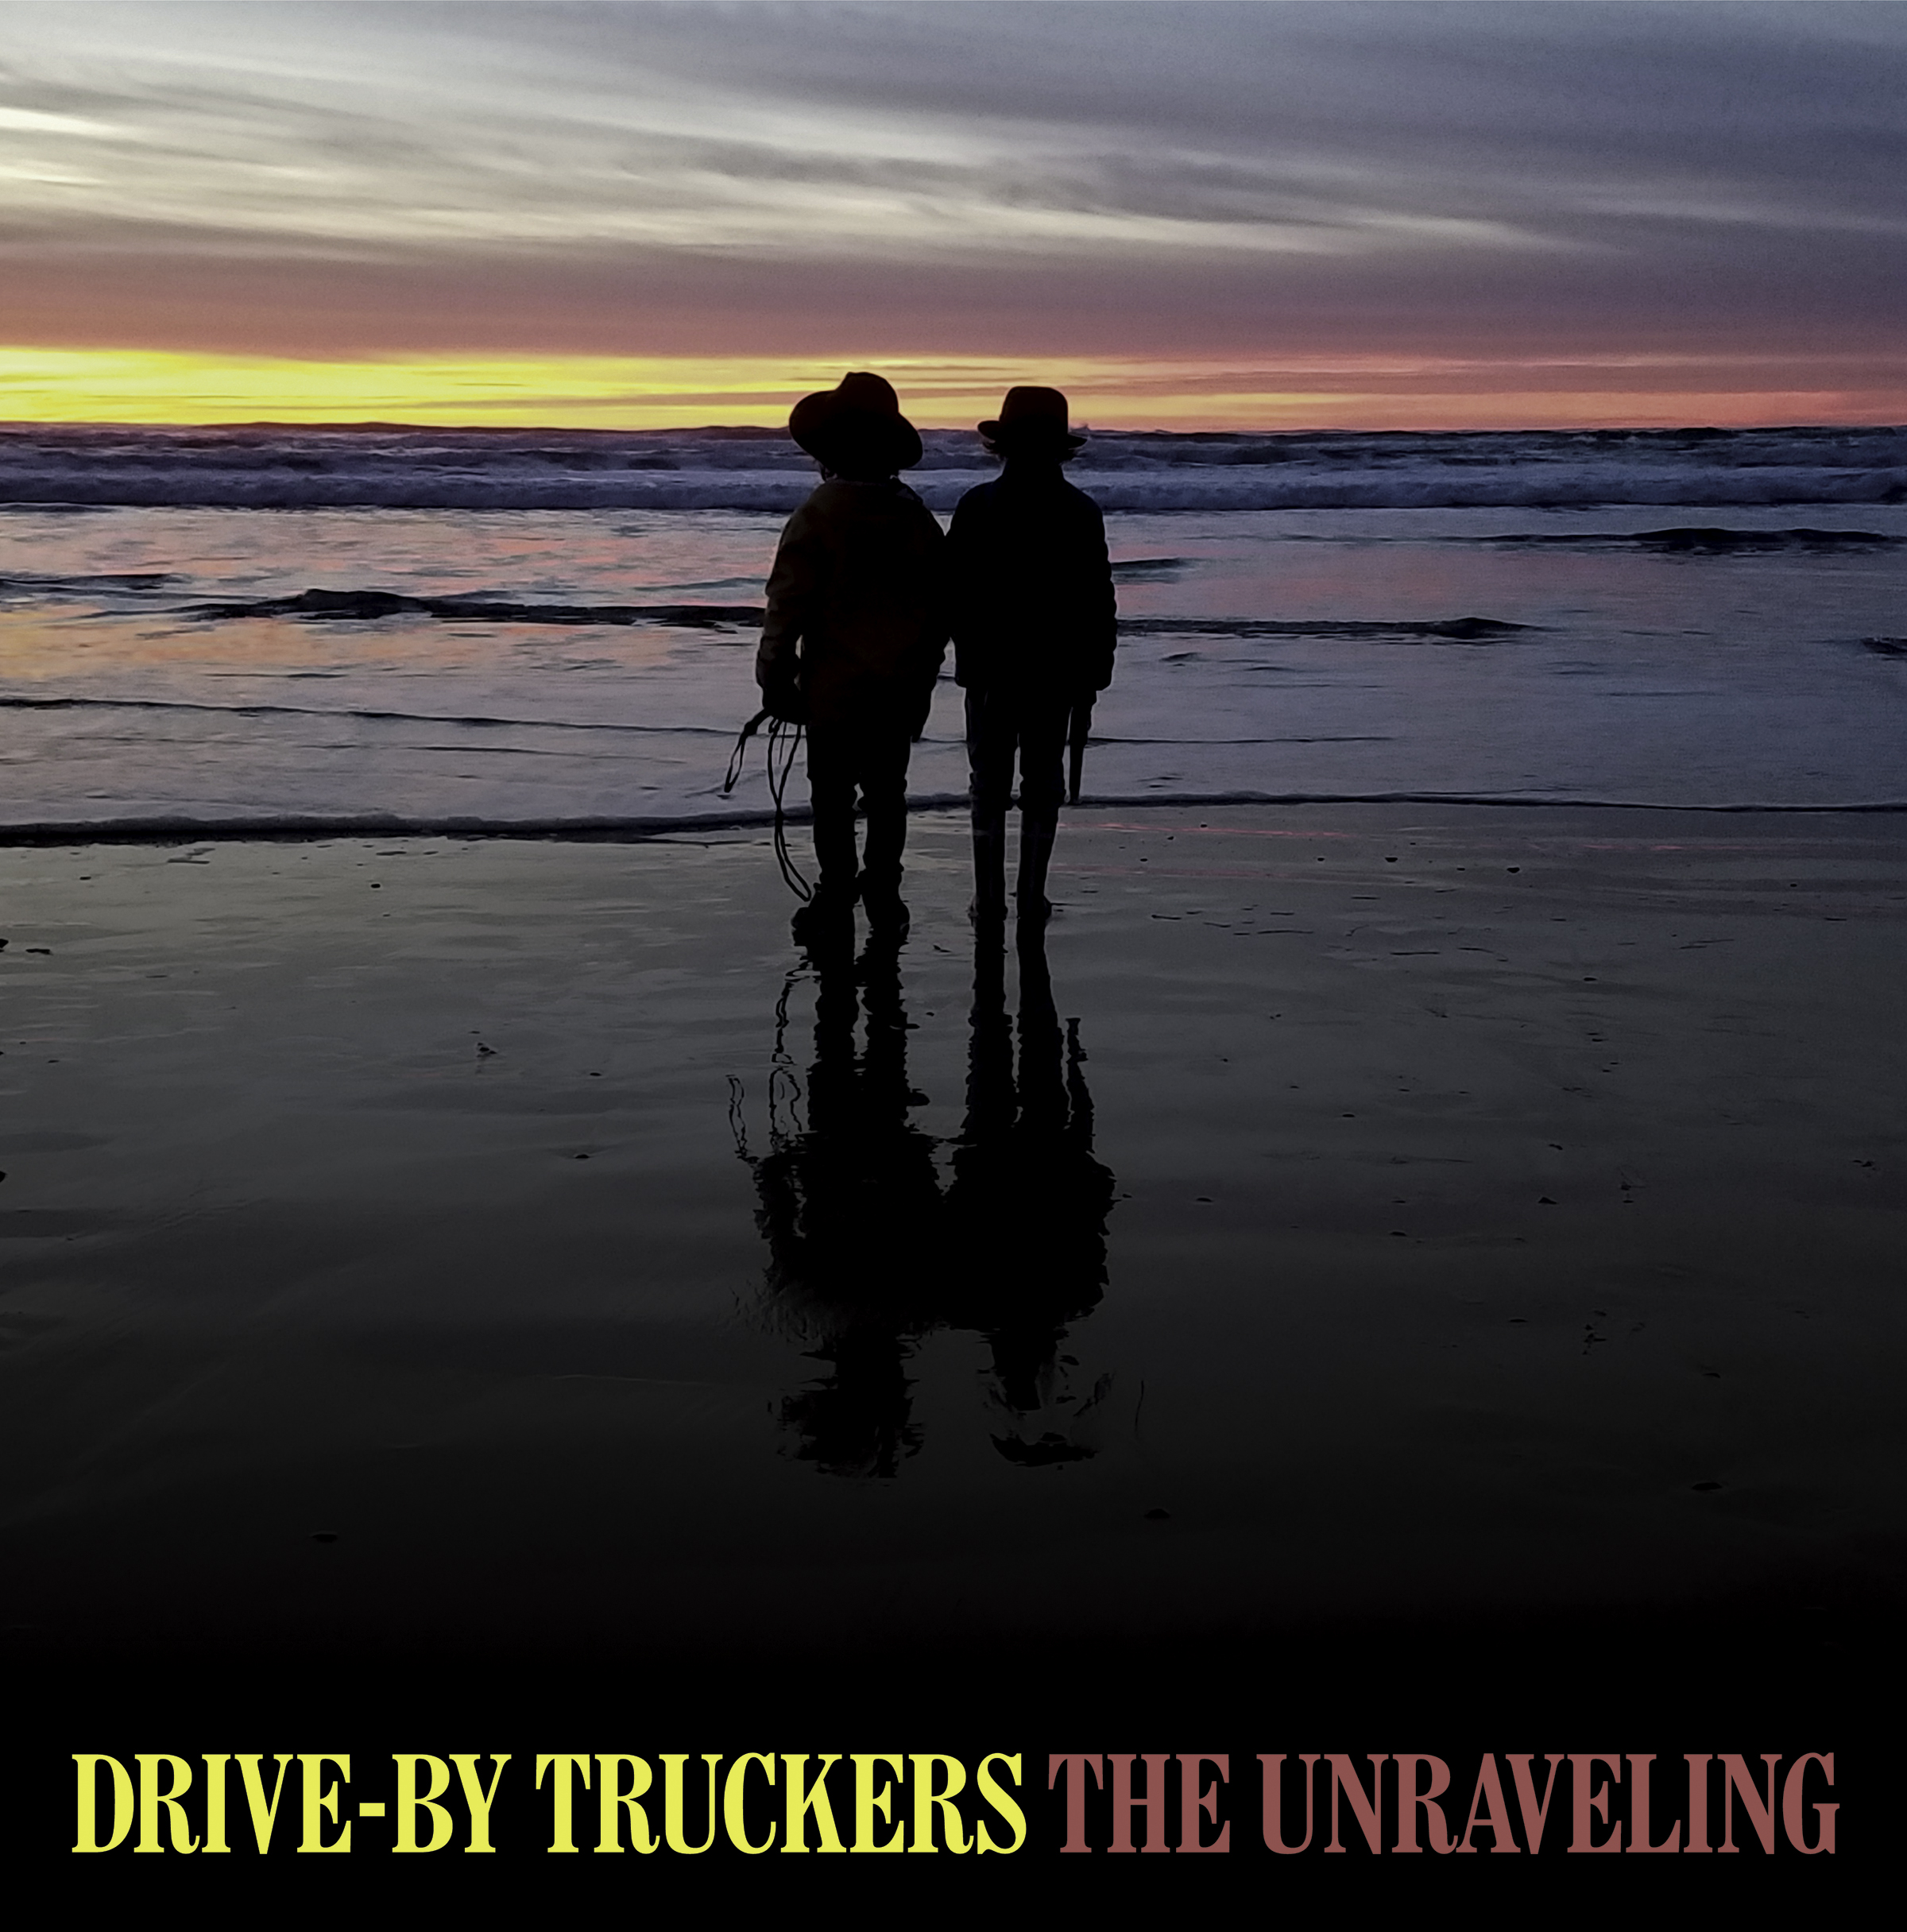 The Unraveling by Drive-By Truckers